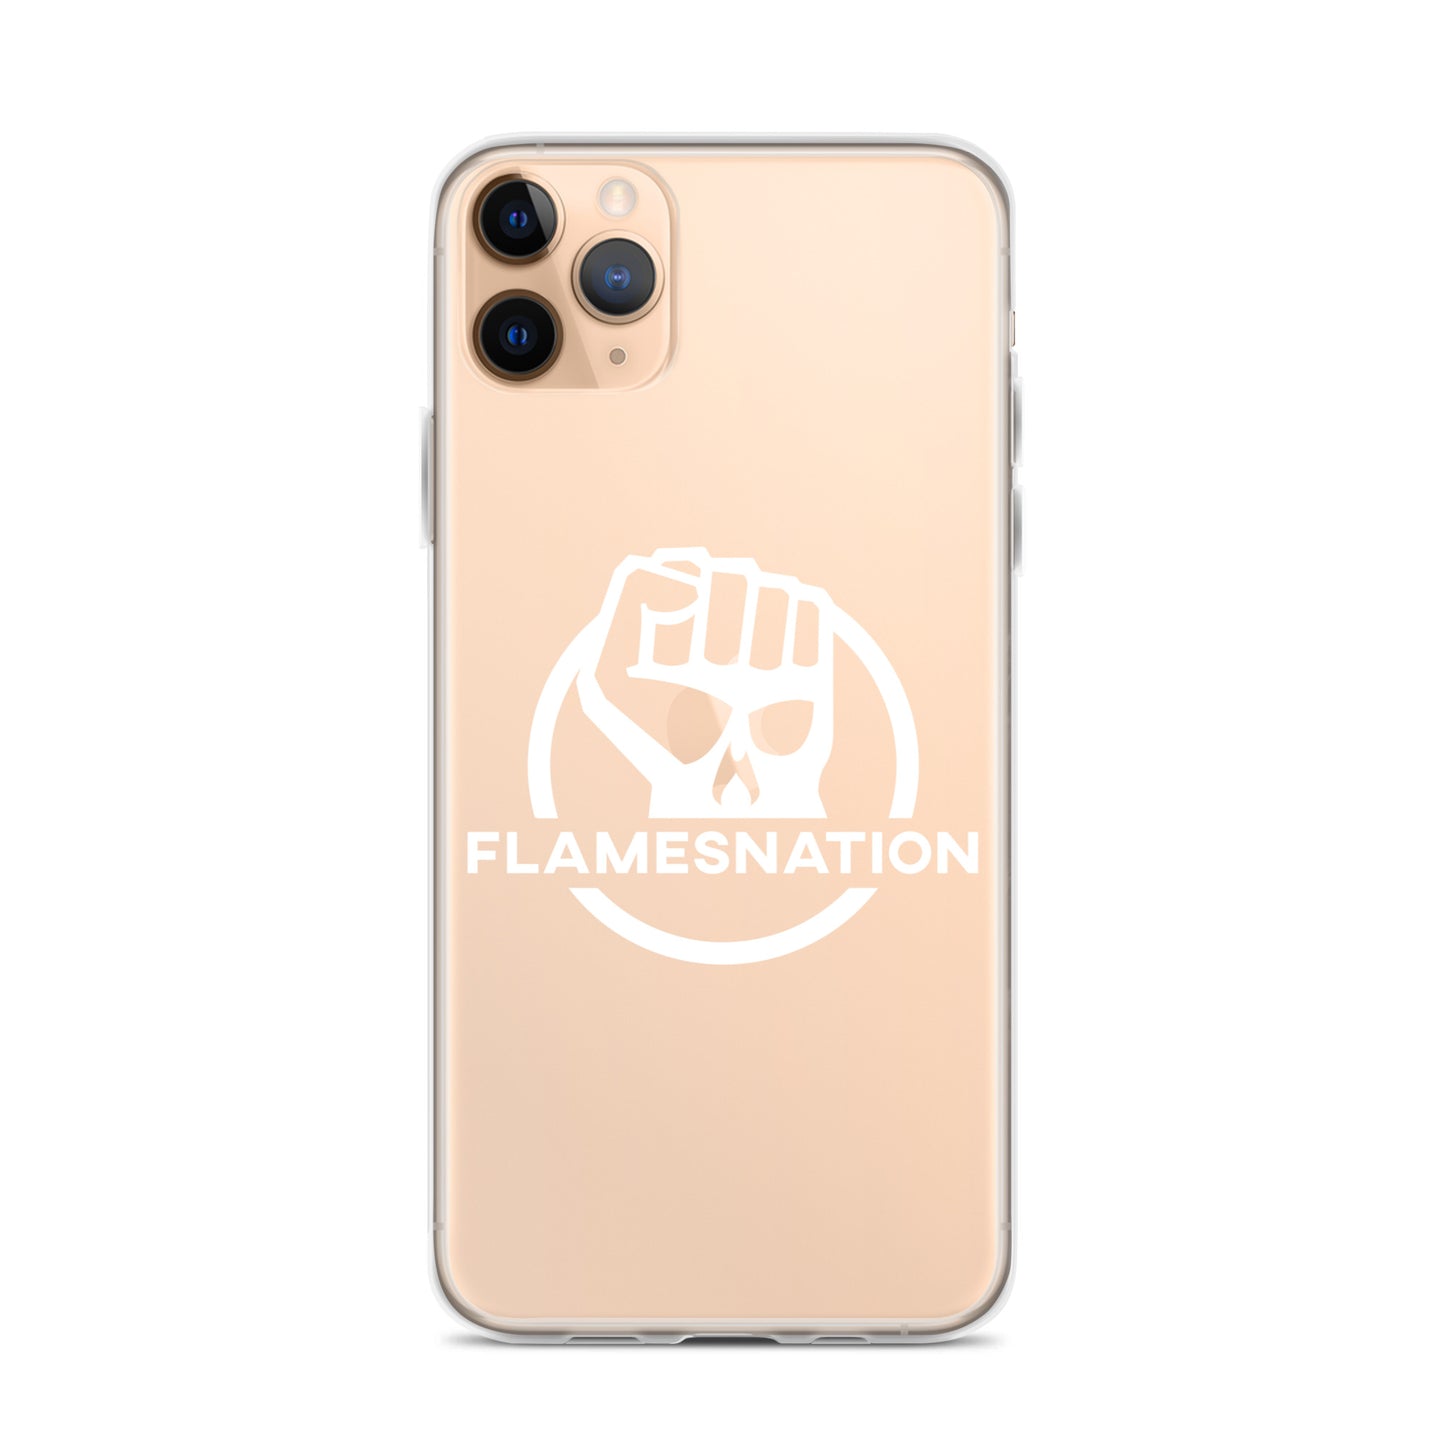 Flamesnation - Clear Case for iPhone® White Logo